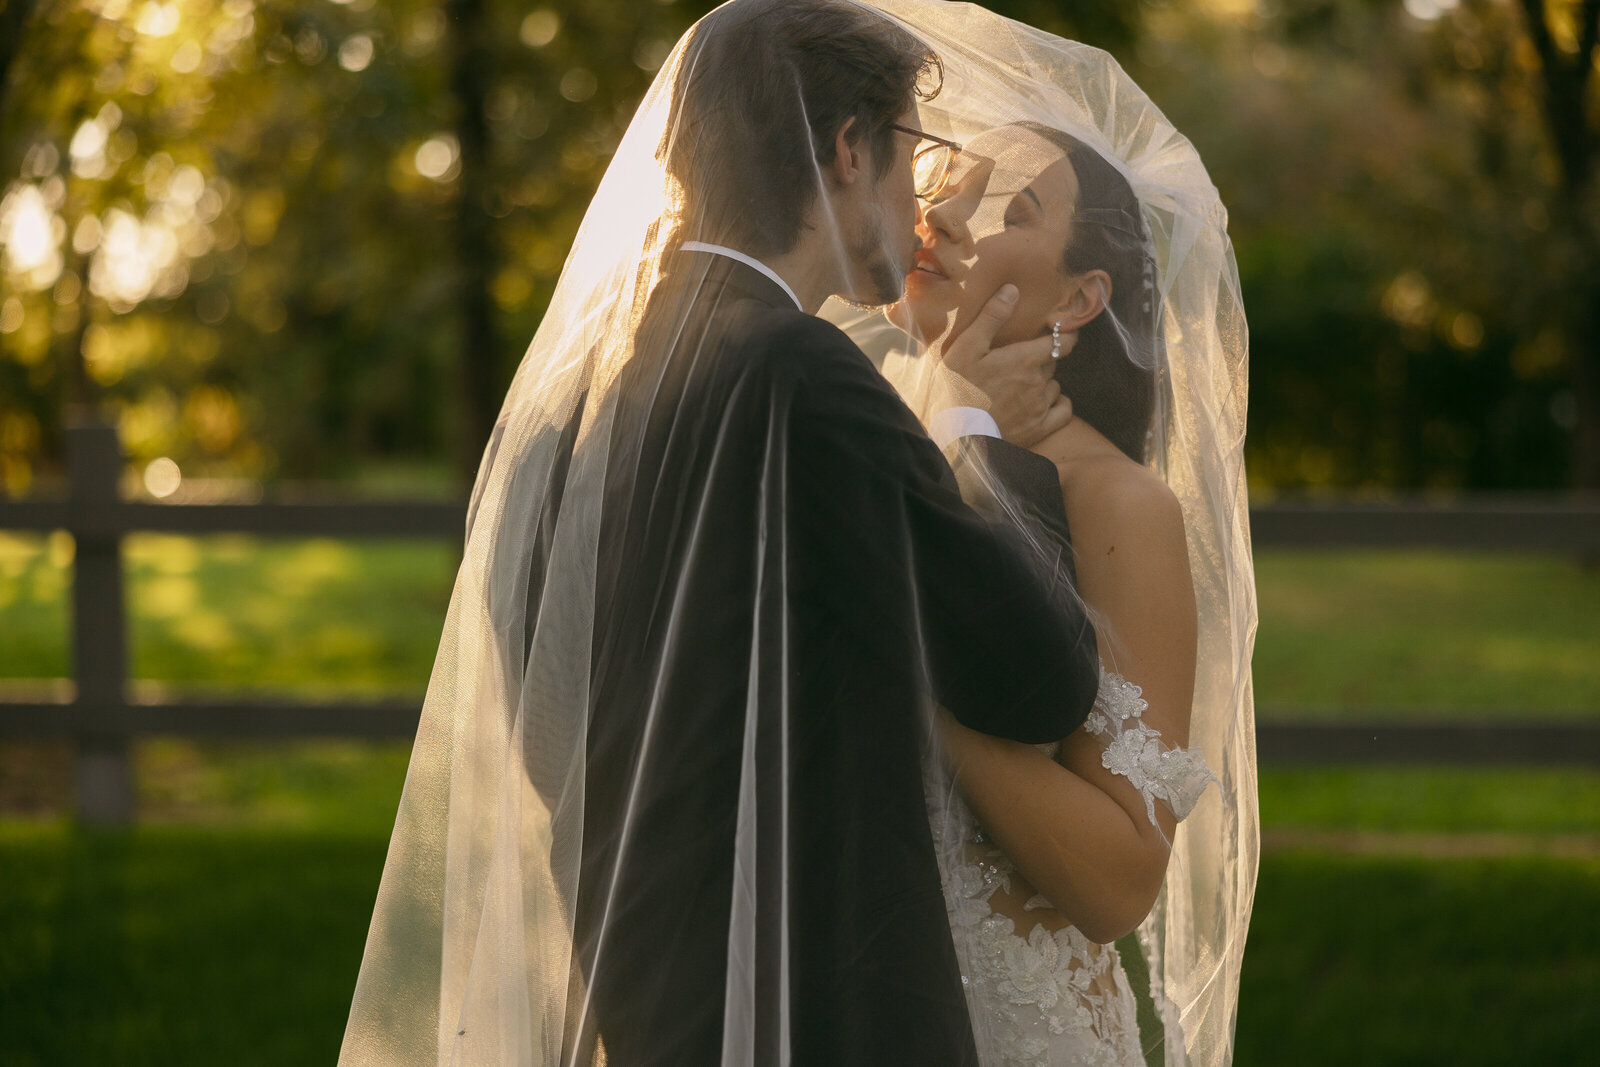 A bride and groom kissing with a veil over their heads.